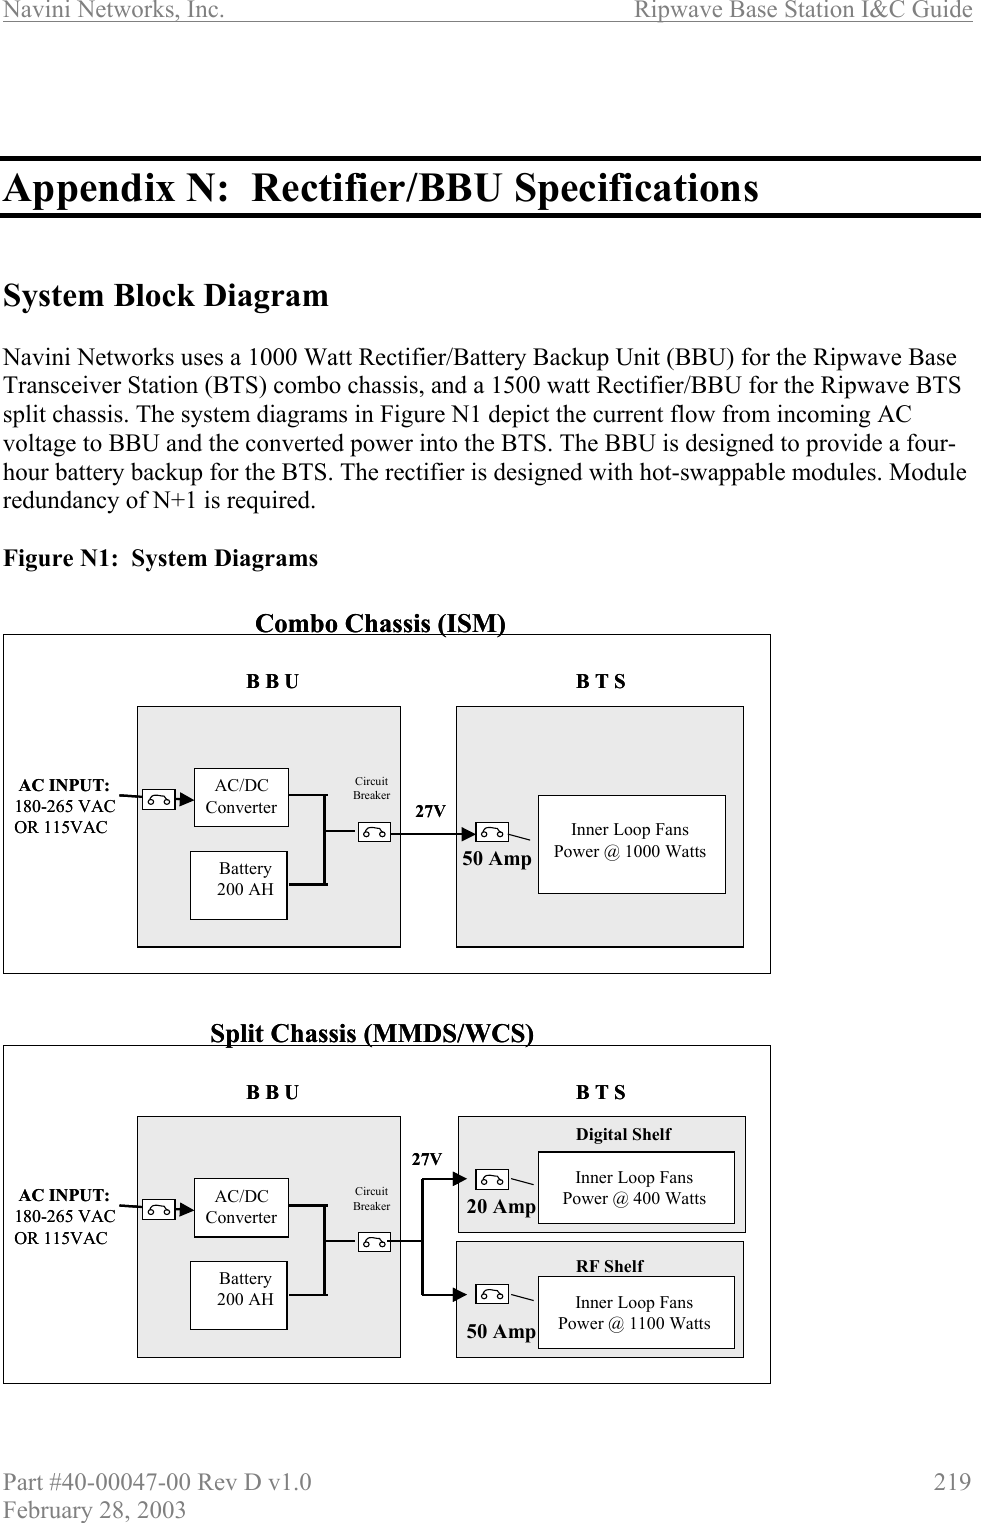 Navini Networks, Inc.                          Ripwave Base Station I&amp;C Guide Part #40-00047-00 Rev D v1.0                     219 February 28, 2003    Appendix N:  Rectifier/BBU Specifications   System Block Diagram  Navini Networks uses a 1000 Watt Rectifier/Battery Backup Unit (BBU) for the Ripwave Base Transceiver Station (BTS) combo chassis, and a 1500 watt Rectifier/BBU for the Ripwave BTS split chassis. The system diagrams in Figure N1 depict the current flow from incoming AC voltage to BBU and the converted power into the BTS. The BBU is designed to provide a four-hour battery backup for the BTS. The rectifier is designed with hot-swappable modules. Module redundancy of N+1 is required.   Figure N1:  System Diagrams                              Combo Chassis (ISM)AC INPUT:180-265 VAC OR 115VAC  27VAC/DC ConverterBattery200 AHB B U B T SCircuitBreakerInner Loop FansPower @ 1000 Watts50 AmpAC INPUT:180-265 VAC OR 115VAC 27VAC/DC ConverterBattery200 AHB B U B T SCircuitBreakerInner Loop FansPower @ 400 WattsInner Loop FansPower @ 1100 WattsDigital ShelfRF Shelf50 Amp20 AmpSplit Chassis (MMDS/WCS)Combo Chassis (ISM)AC INPUT:180-265 VAC OR 115VAC  27VAC/DC ConverterBattery200 AHB B U B T SCircuitBreakerInner Loop FansPower @ 1000 Watts50 AmpAC INPUT:180-265 VAC OR 115VAC 27VAC/DC ConverterBattery200 AHB B U B T SCircuitBreakerInner Loop FansPower @ 400 WattsInner Loop FansPower @ 1100 WattsDigital ShelfRF Shelf50 Amp20 AmpSplit Chassis (MMDS/WCS)